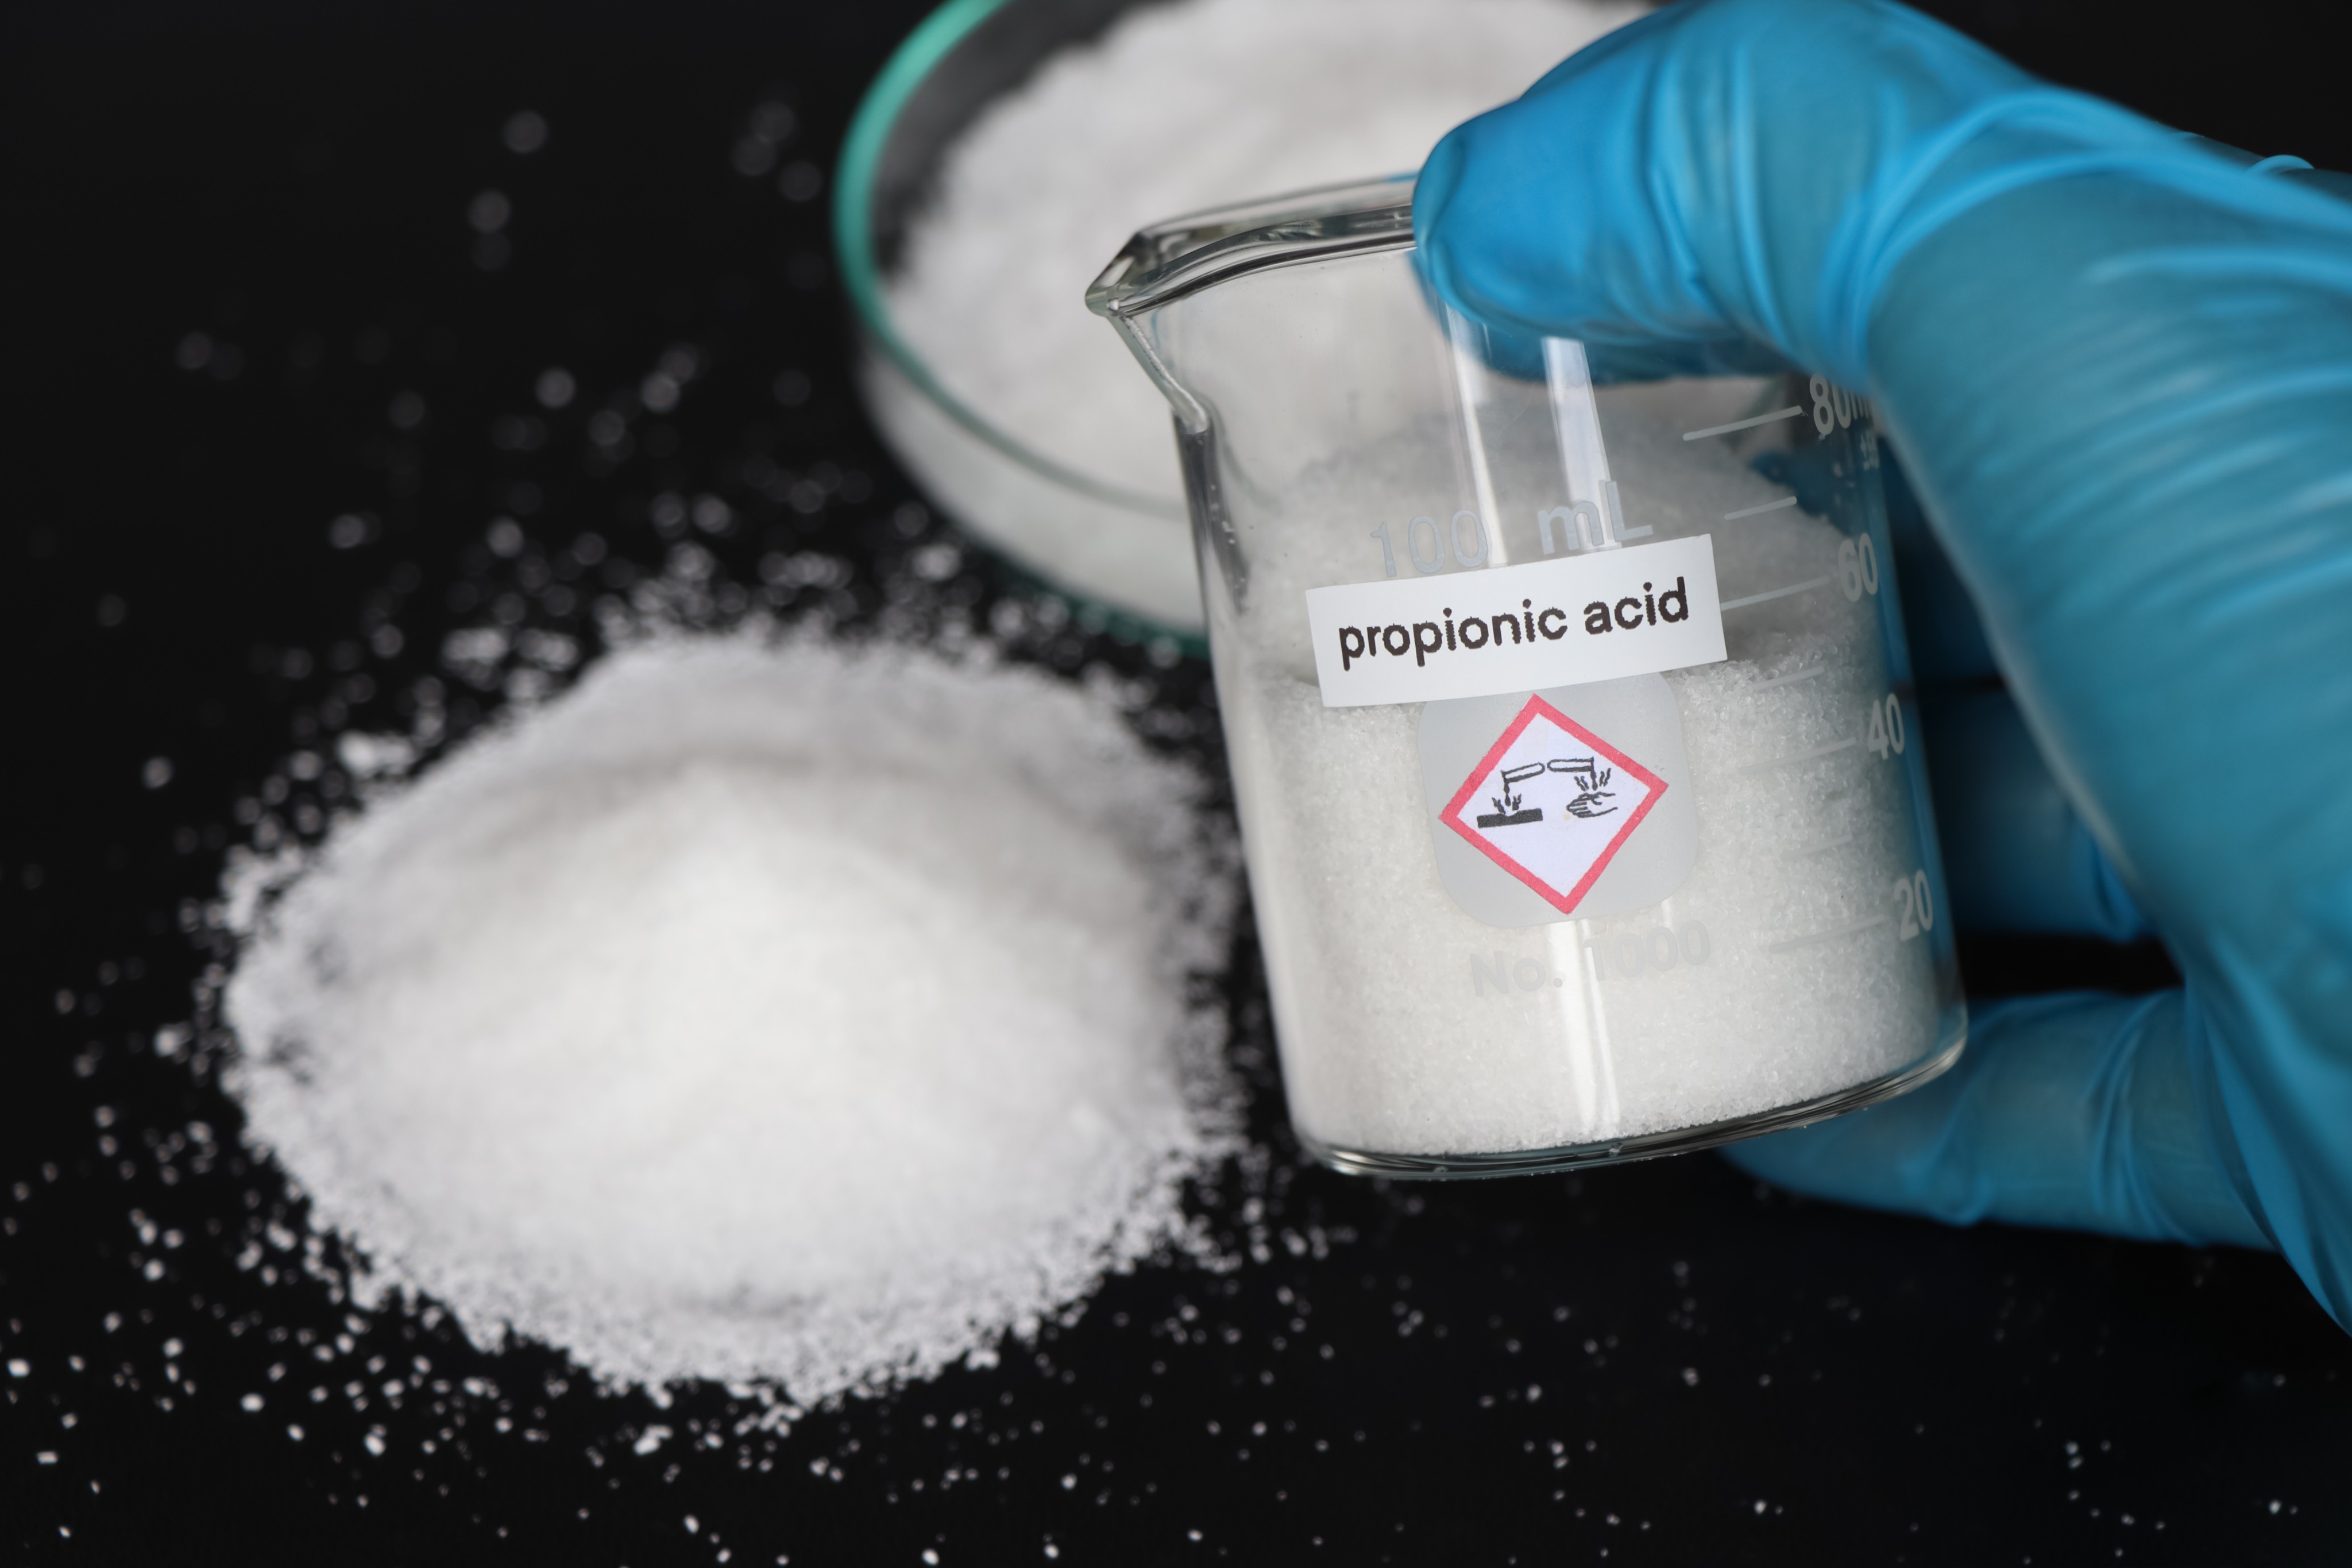 Propionic acid, frequently used as a preservative, is the latest commodity to be hit by rising trade tensions between China and the US. Photo: Shutterstock